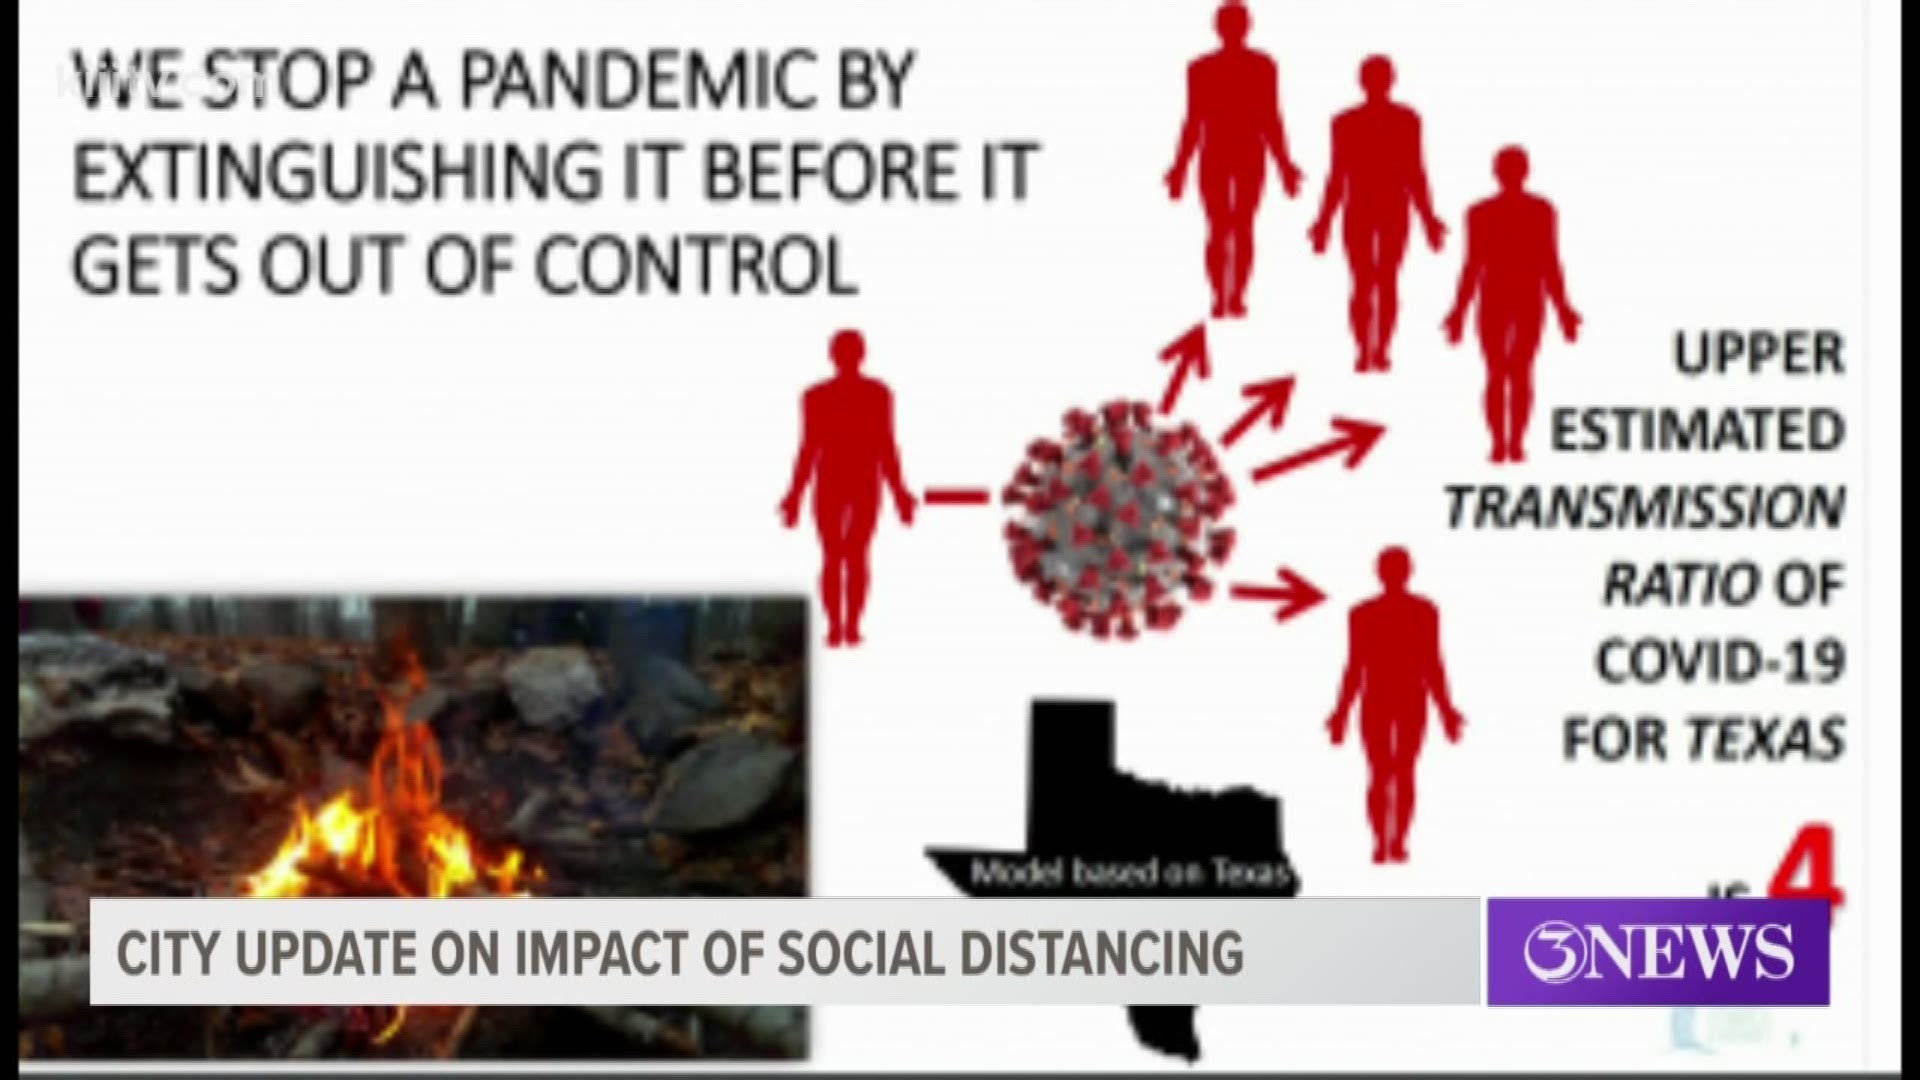 Researcher from TAMUCC analyzed the benefits, impacts of social distancing.